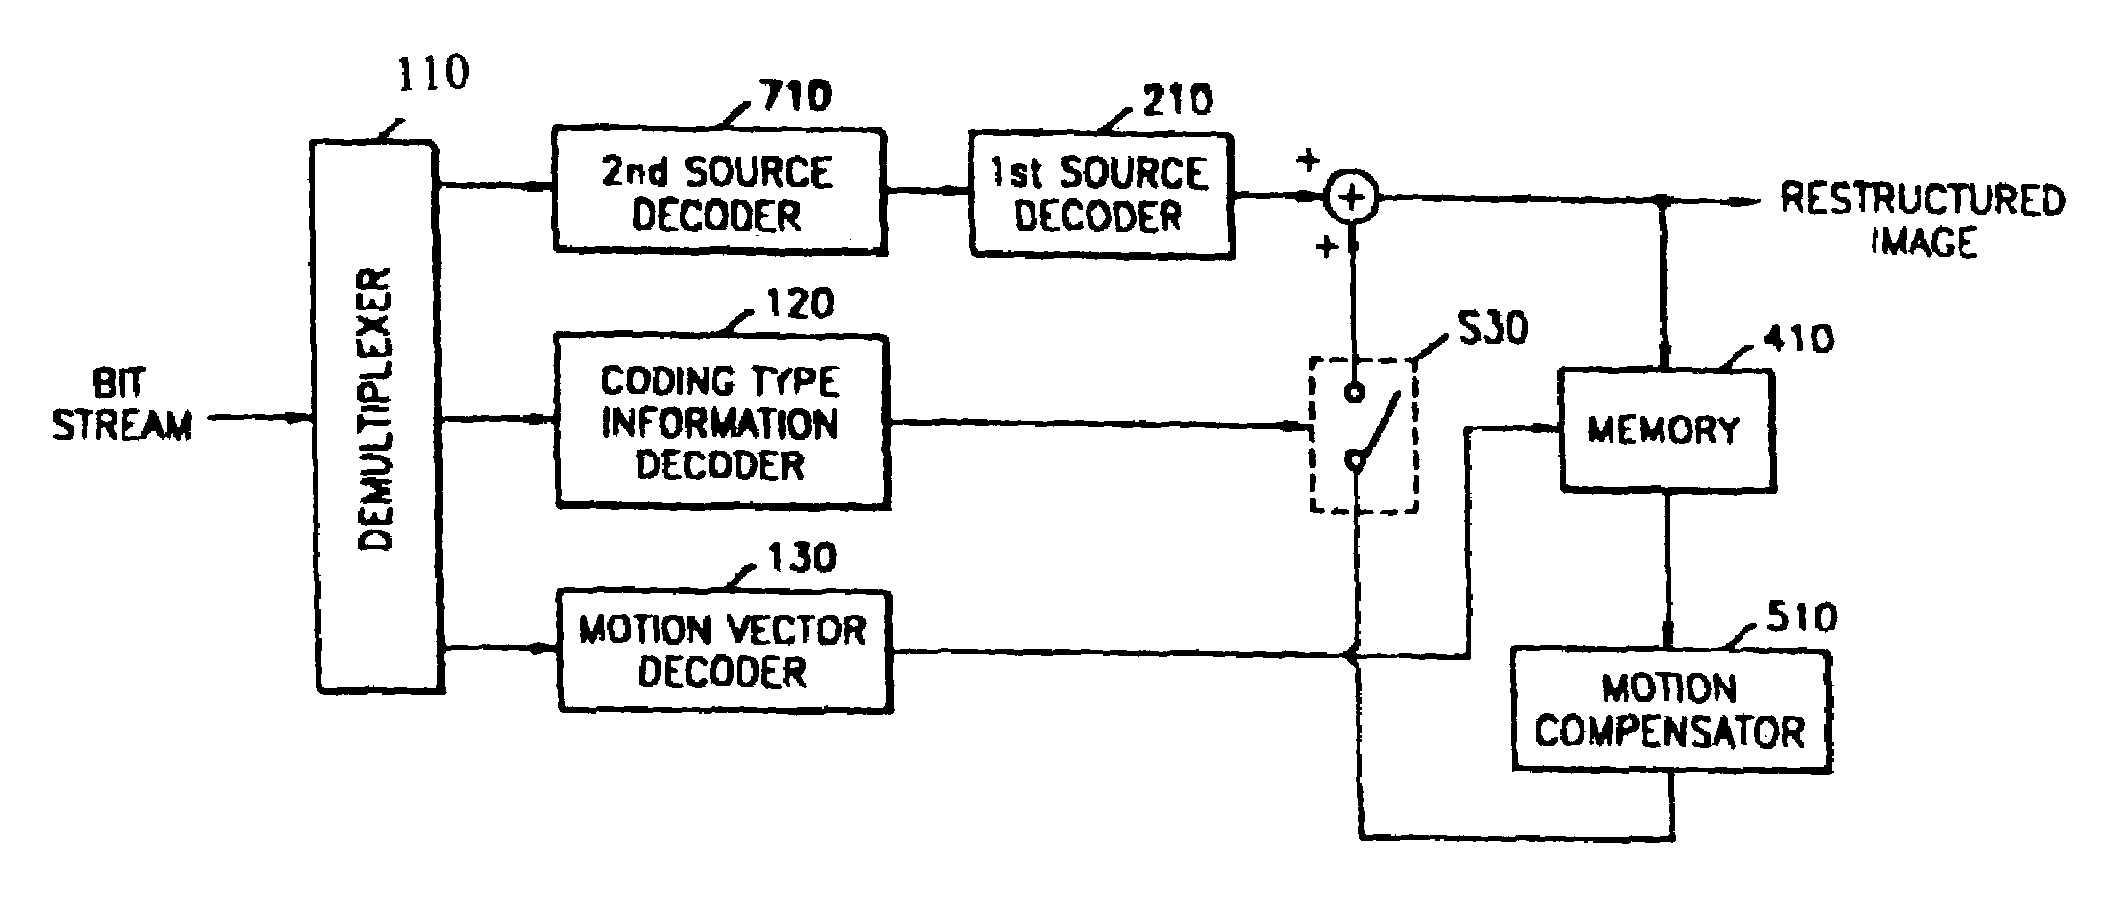 Method and apparatus for encoding and decoding motion vectors